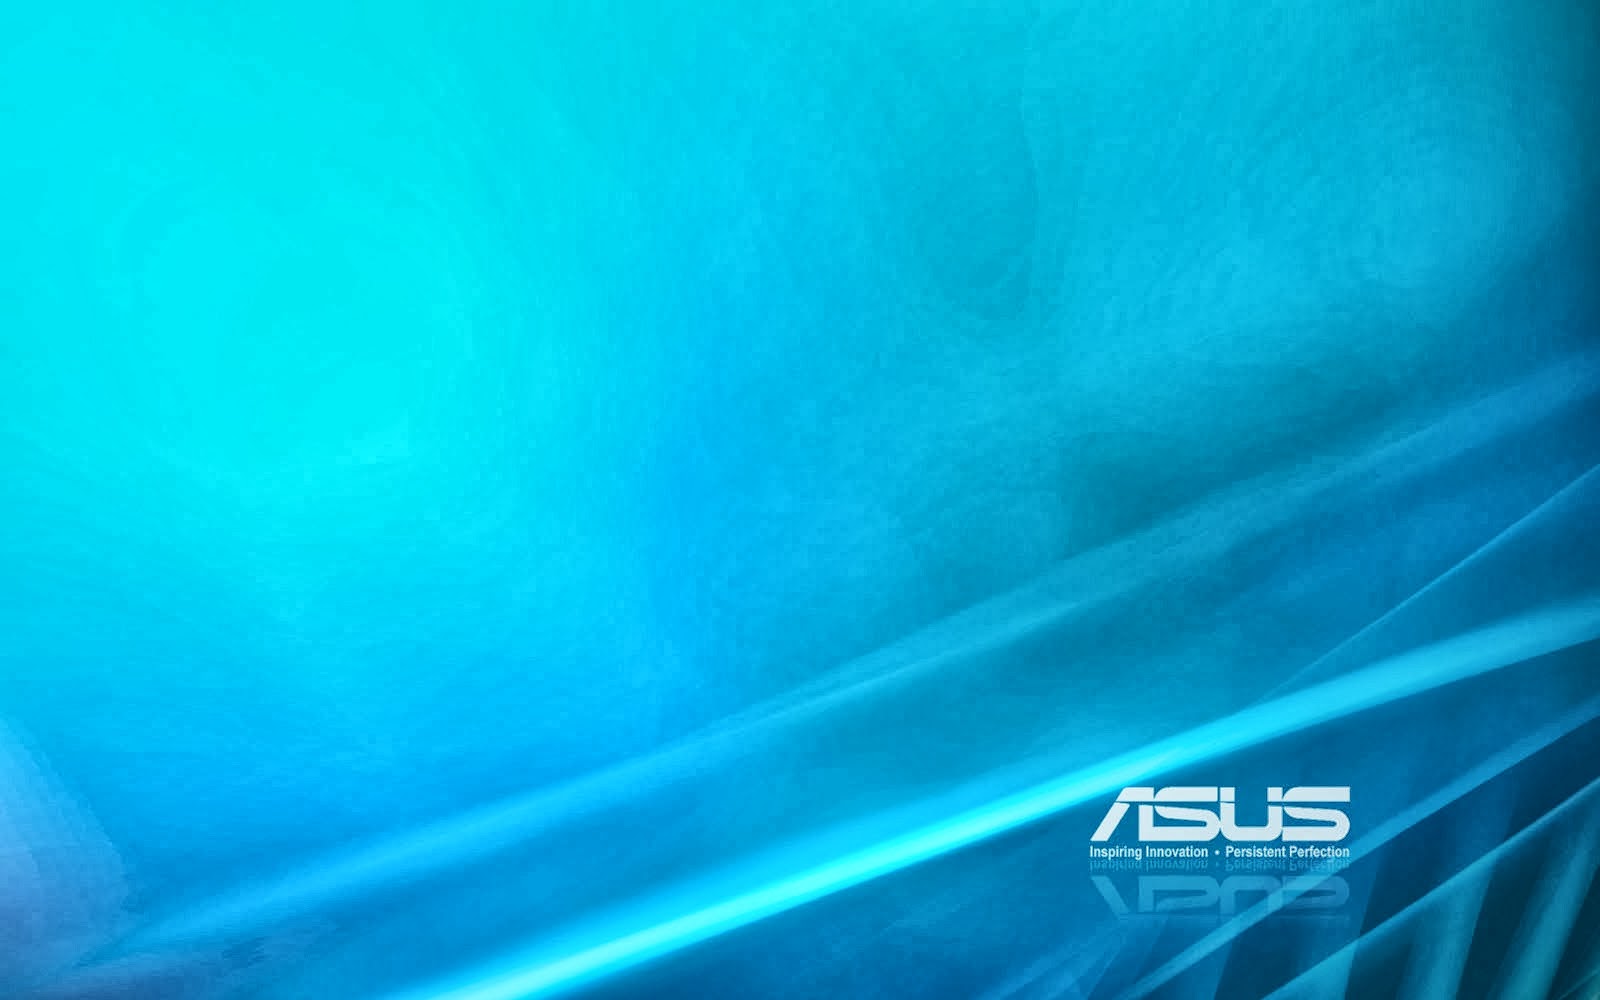 ASUS HD WALLPAPERS FREE HD WALLPAPERS